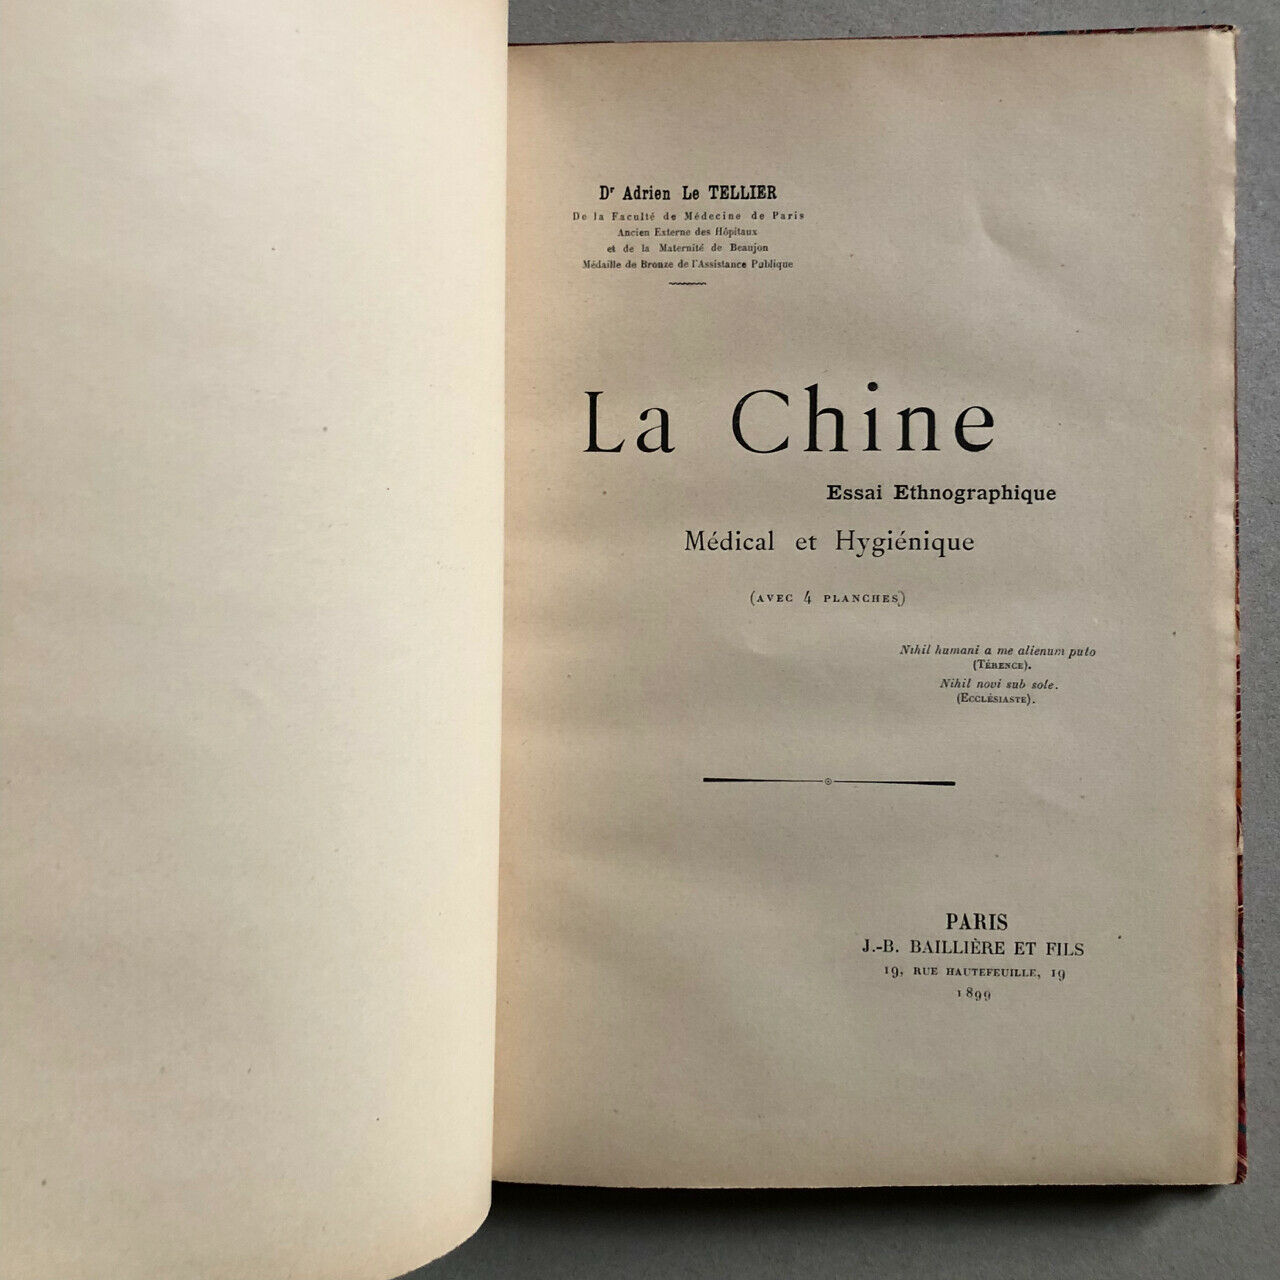 Dr Le Tellier — China — ethnographic essay — 4 pl. ht — Bailliere — 1899.